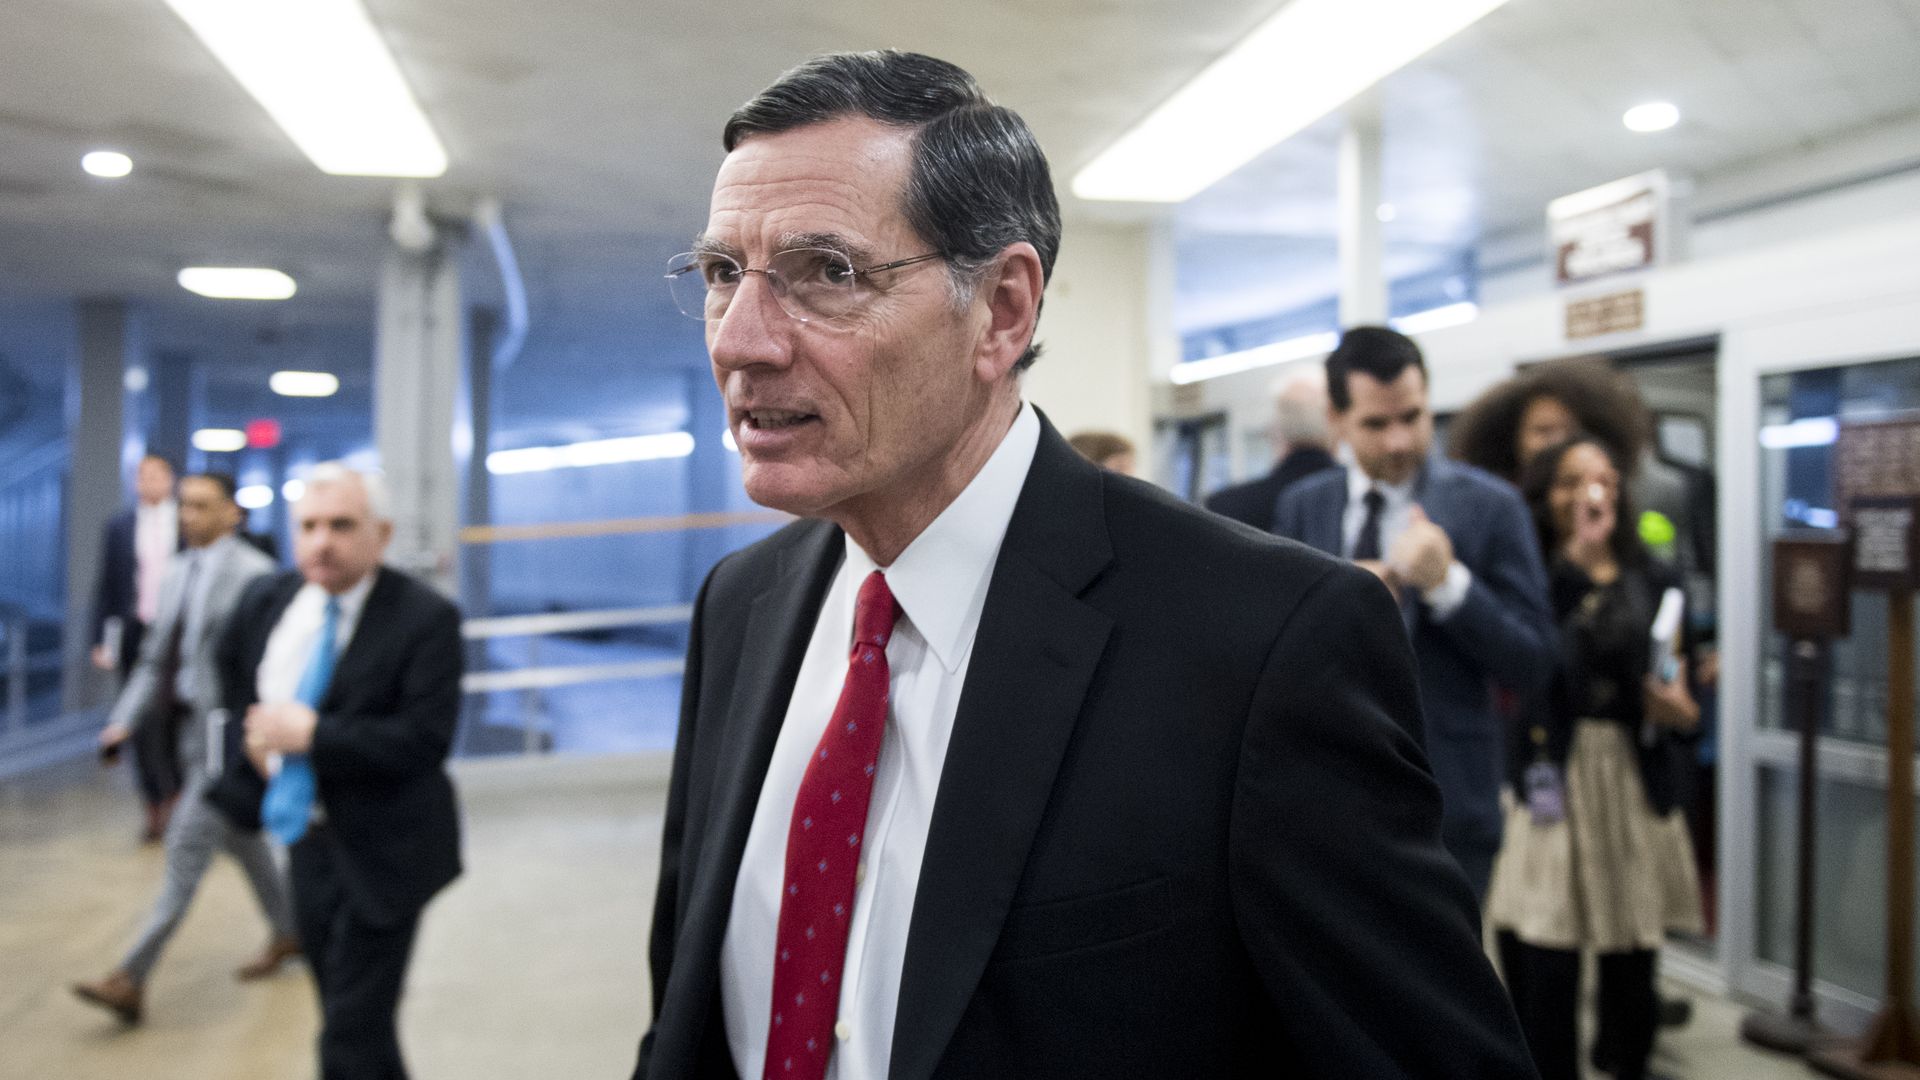 Sen. John Barrasso, R-Wyo., arrives in the Capitol for the Senate policy luncheons on Tuesday, Feb. 26, 2019.